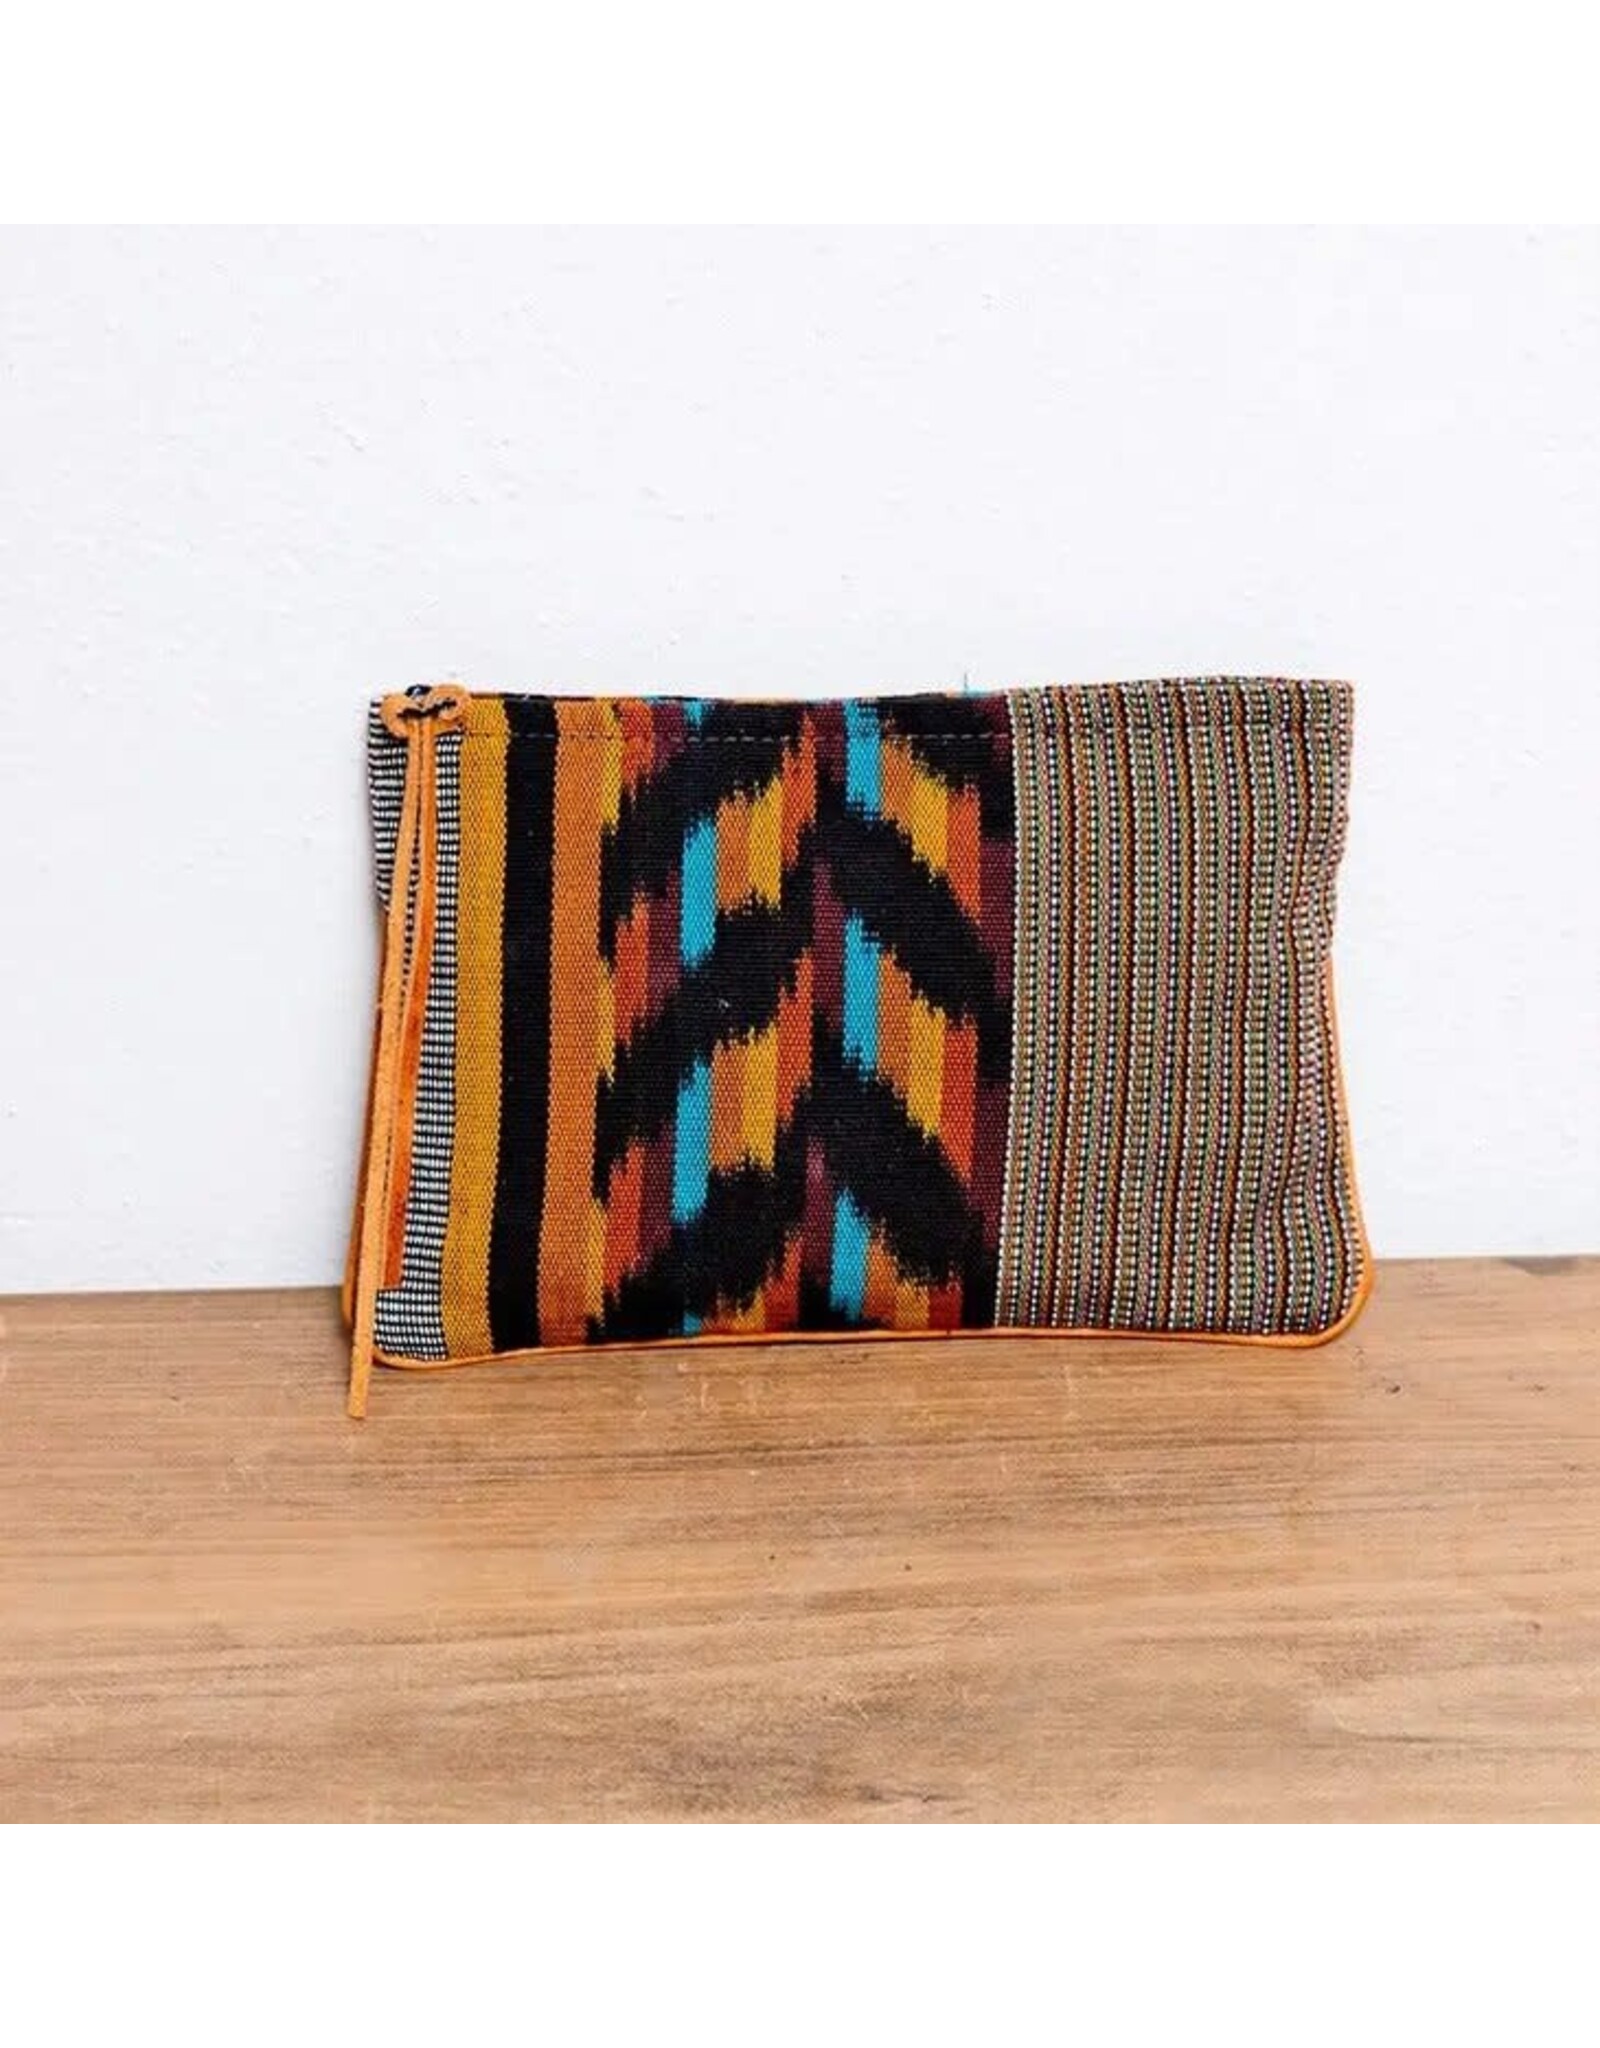 Trade roots Handwoven Cosmetic w/ Leather Detail, Amber